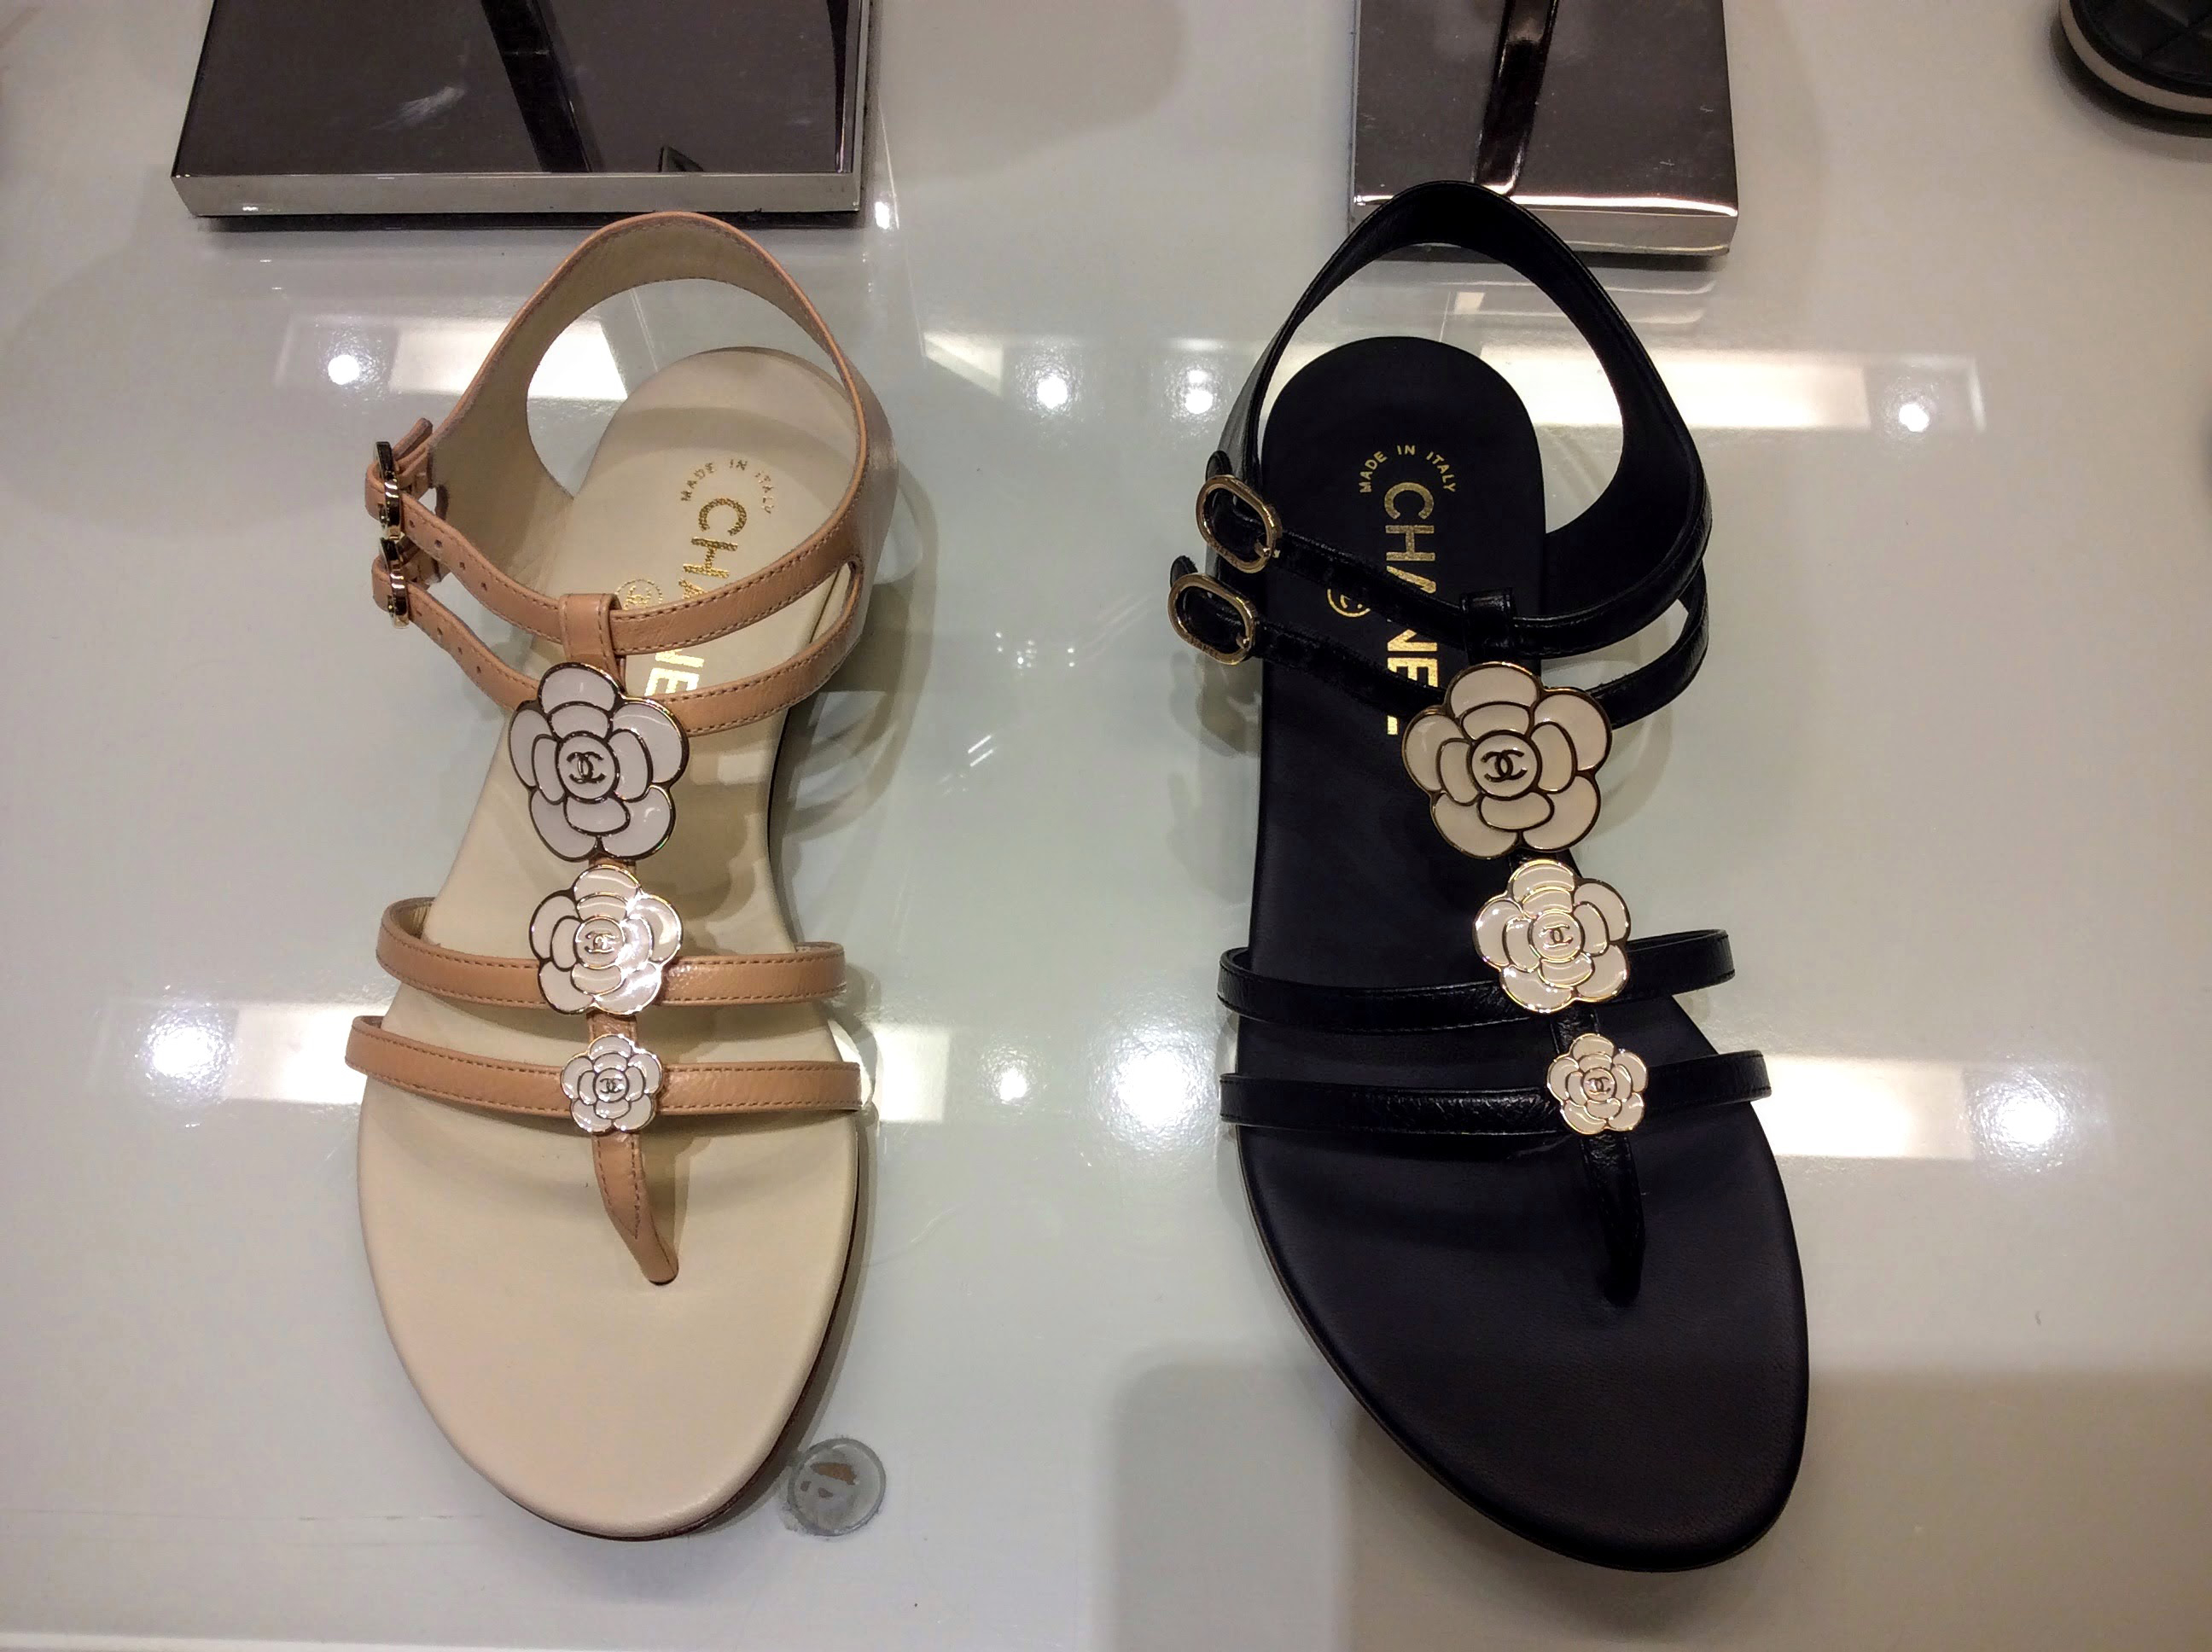 bloomingdale's chanel shoes